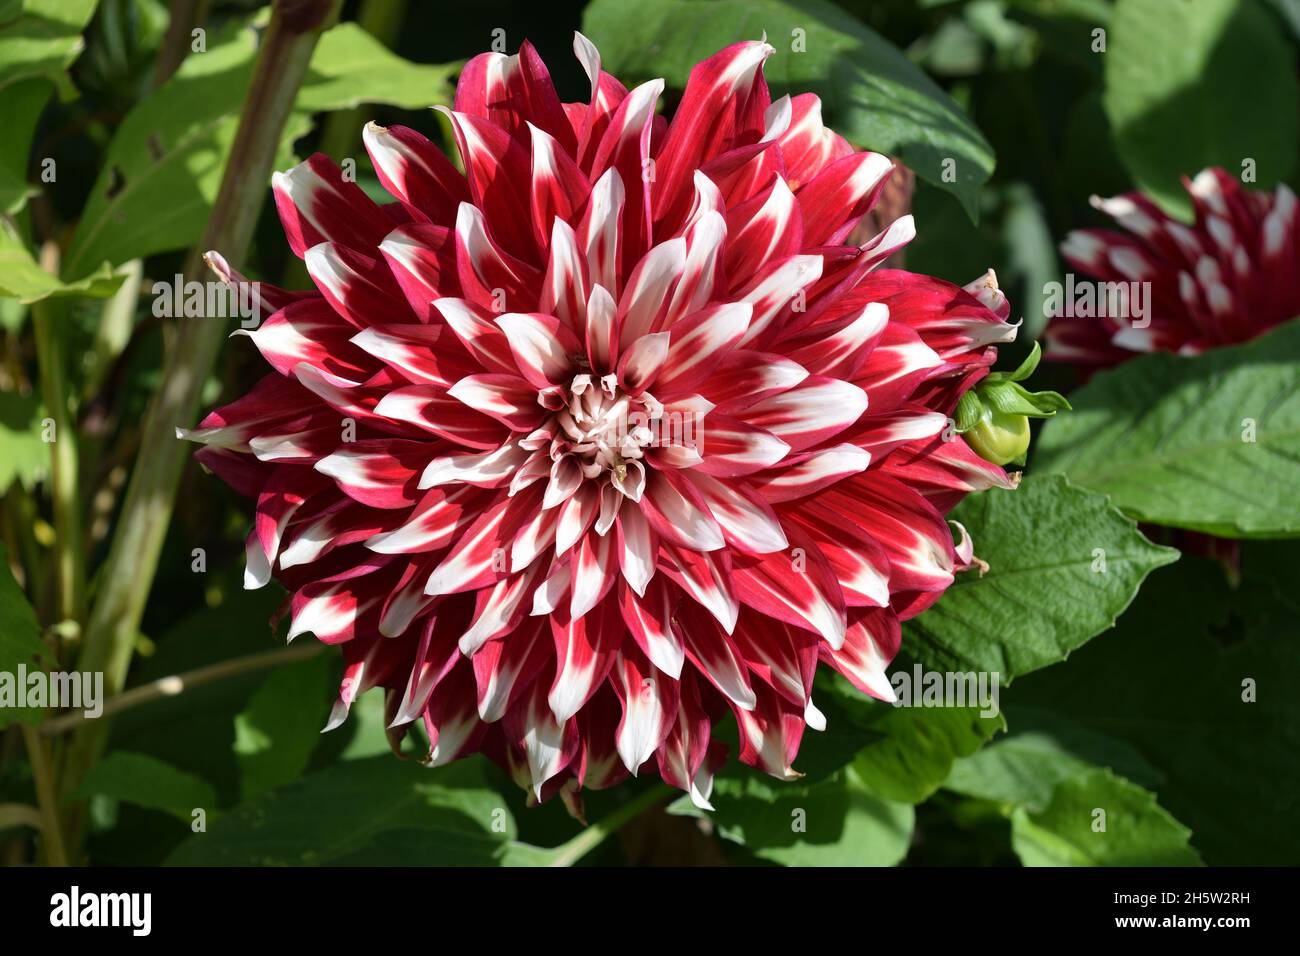 Dahlia Dinnerplate name Special X Factor. Close-up of single large flower with red petals with white tips. Stock Photo